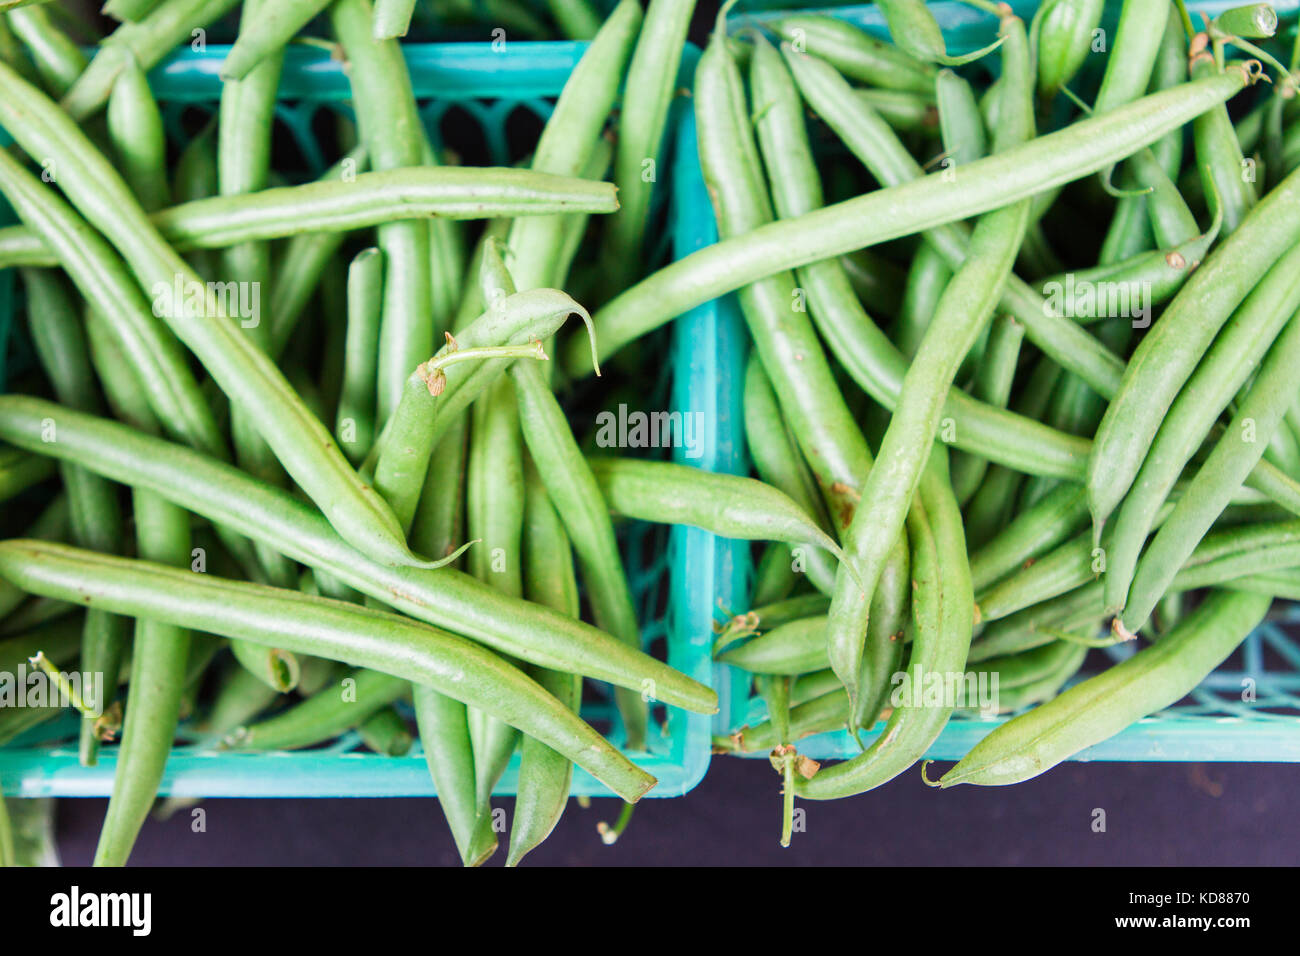 Baskets of green beans at market Stock Photo